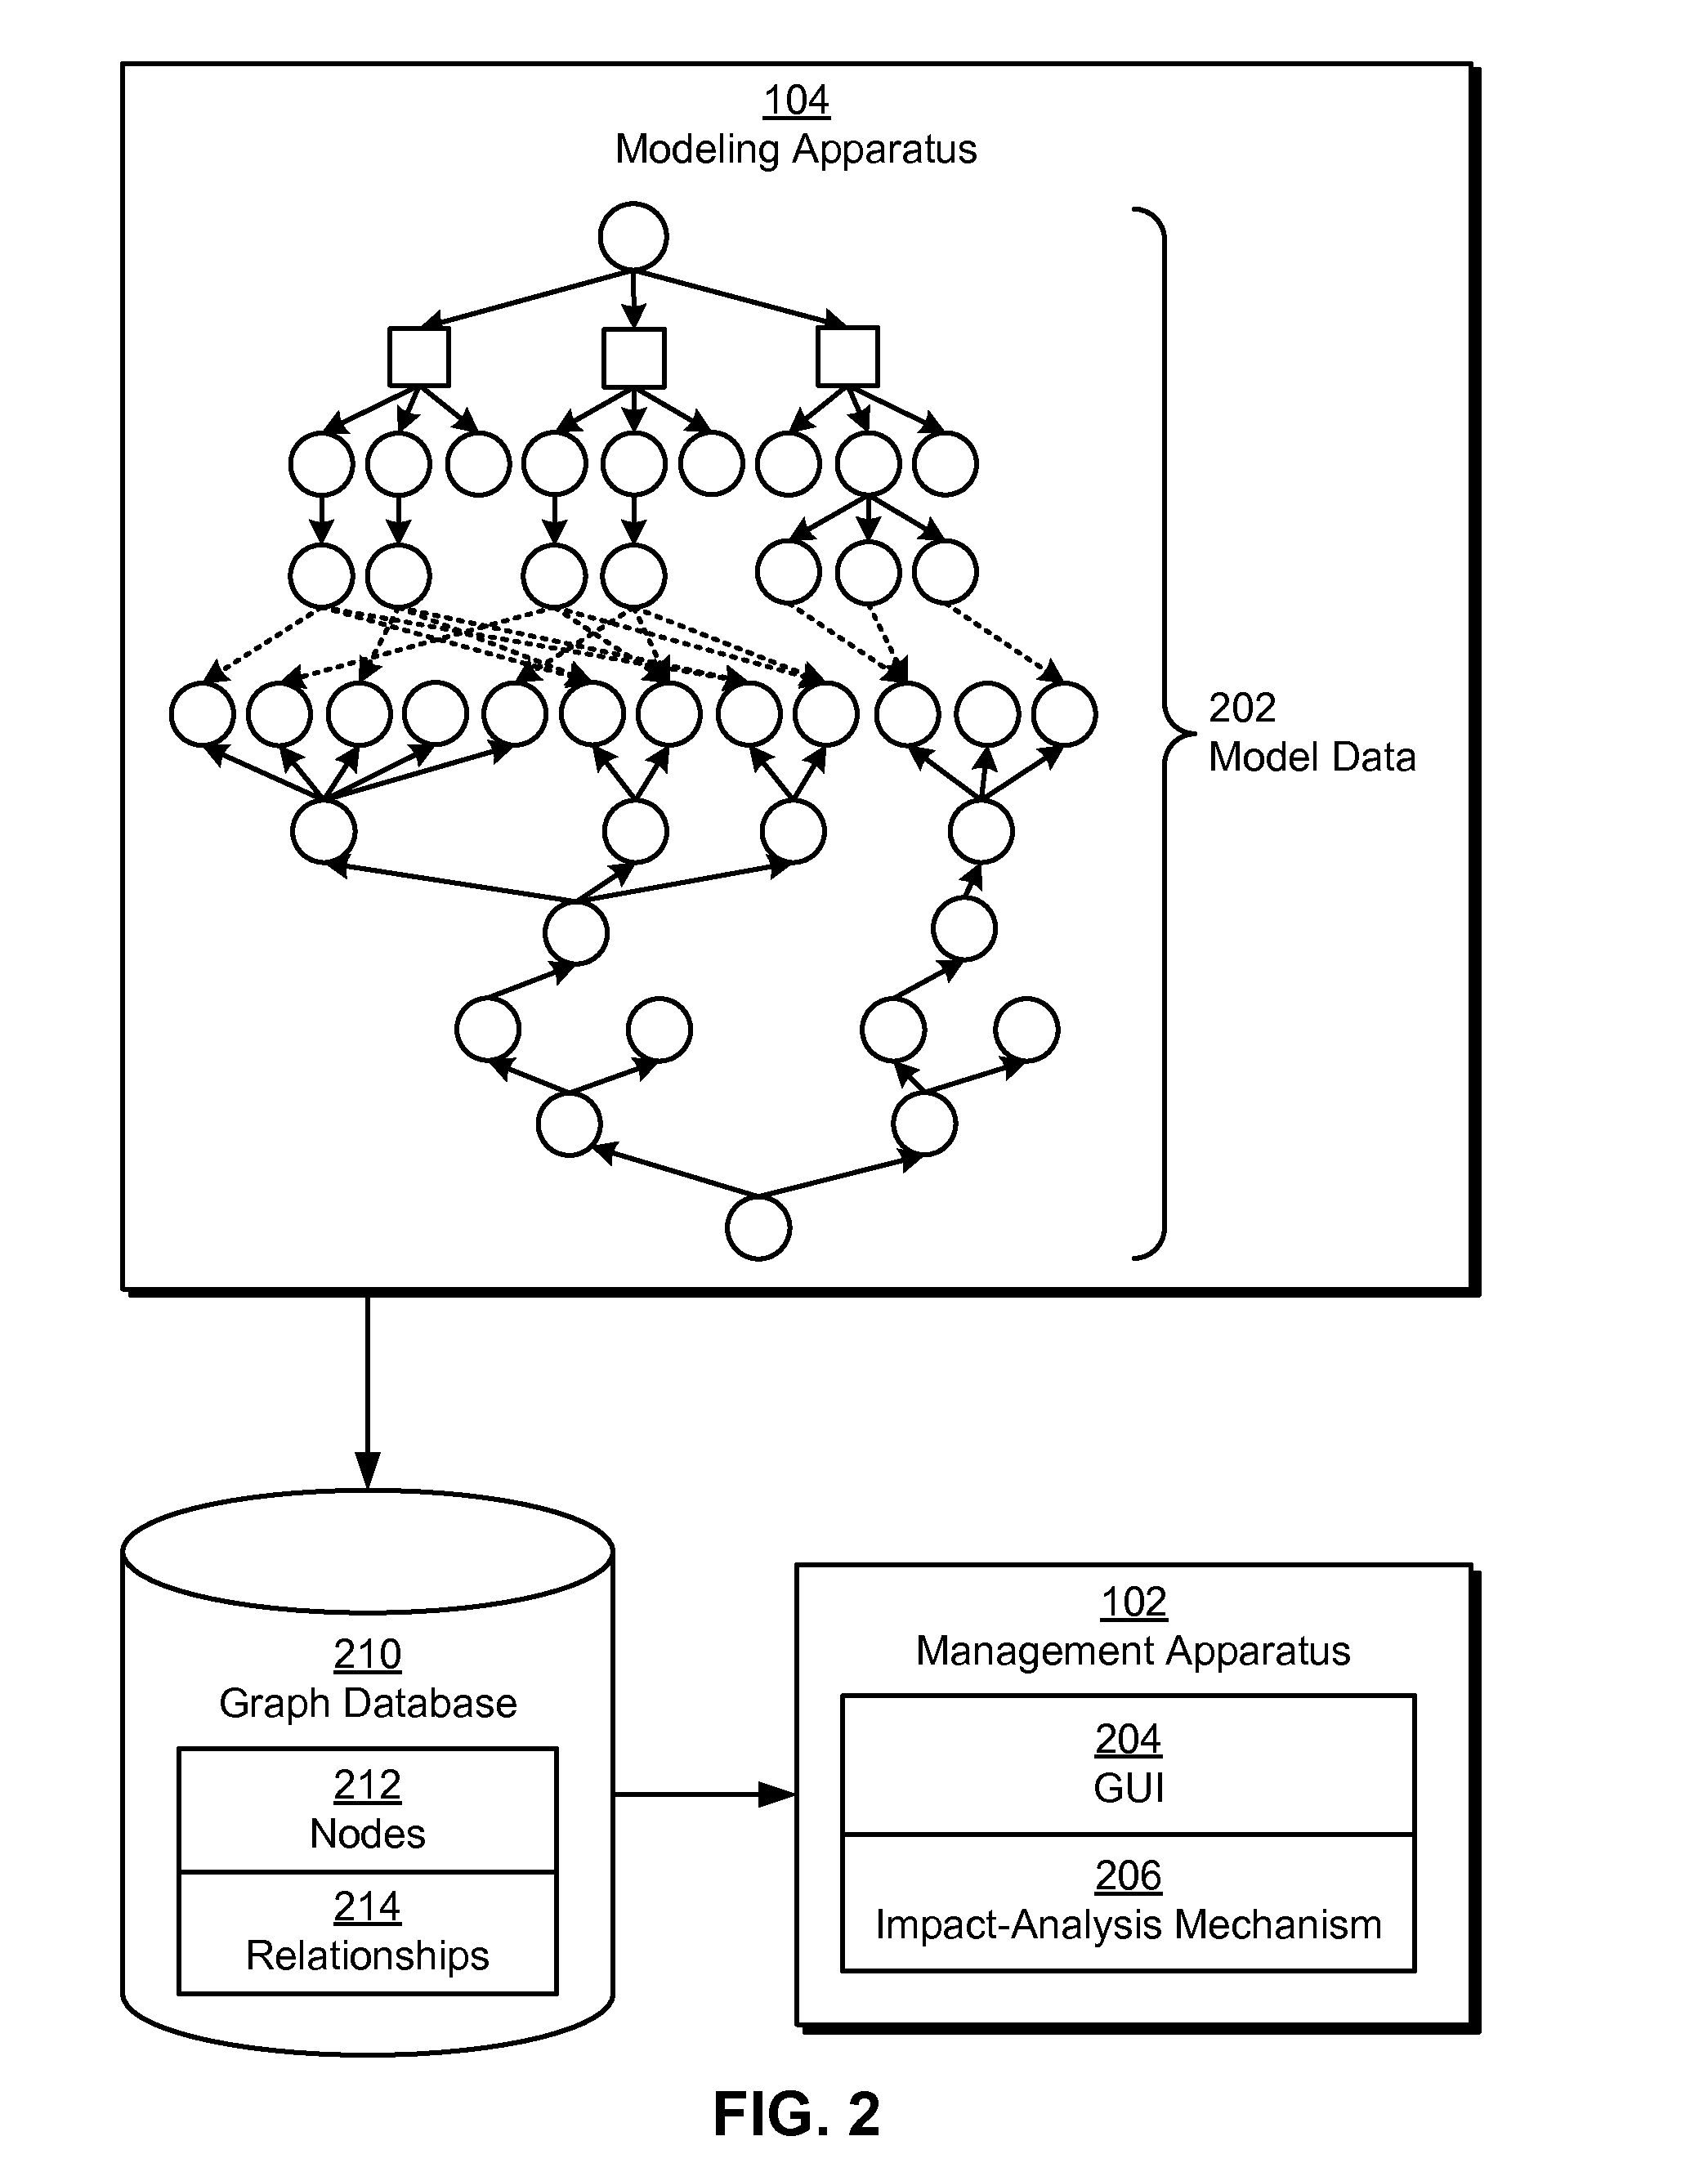 Graph databases for storing multidimensional models of softwqare offerings